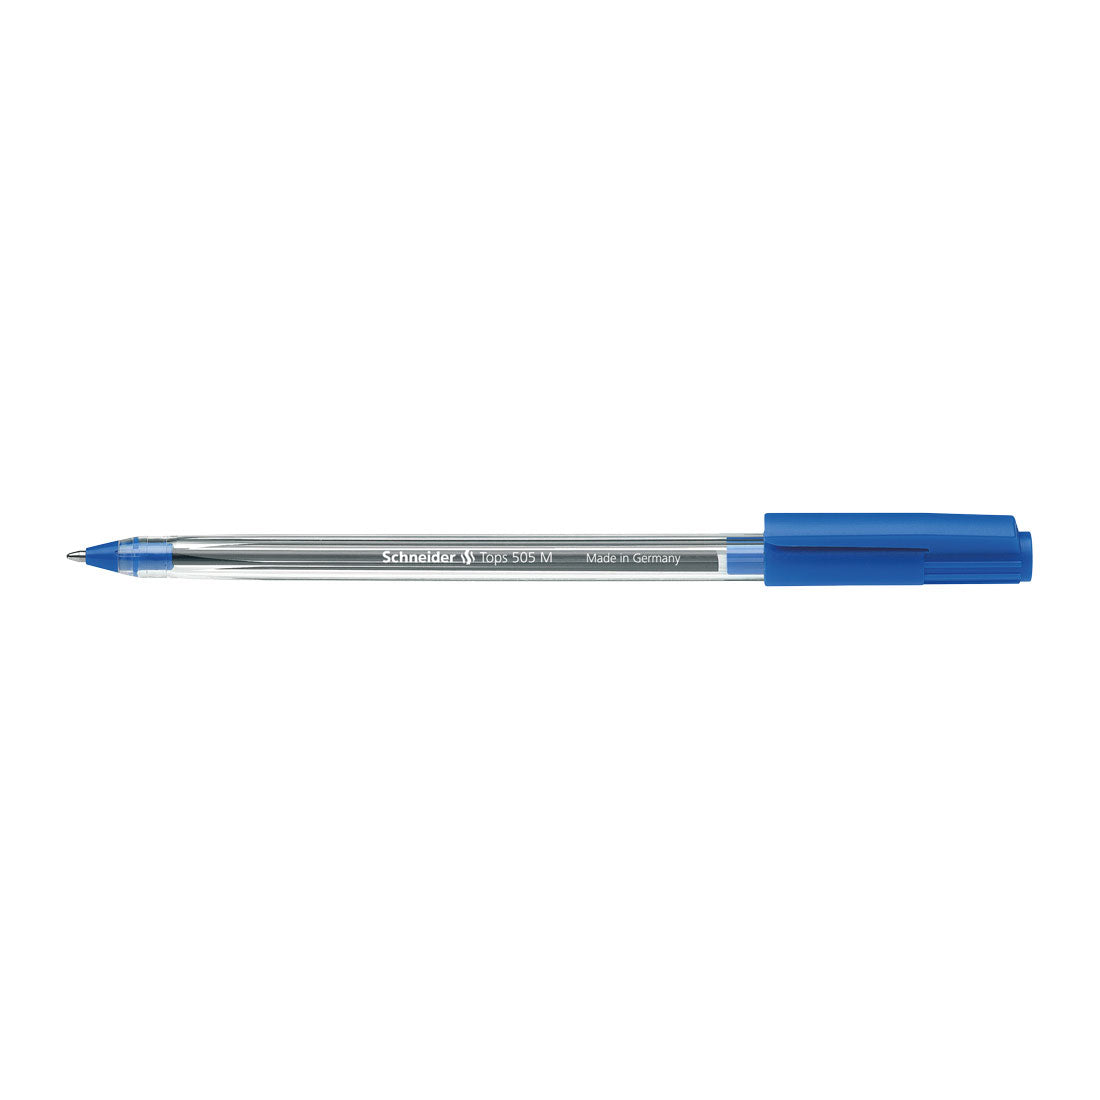 Tops 505 Ballpoint Pens M, Box of 10 units#ink-color_ blue